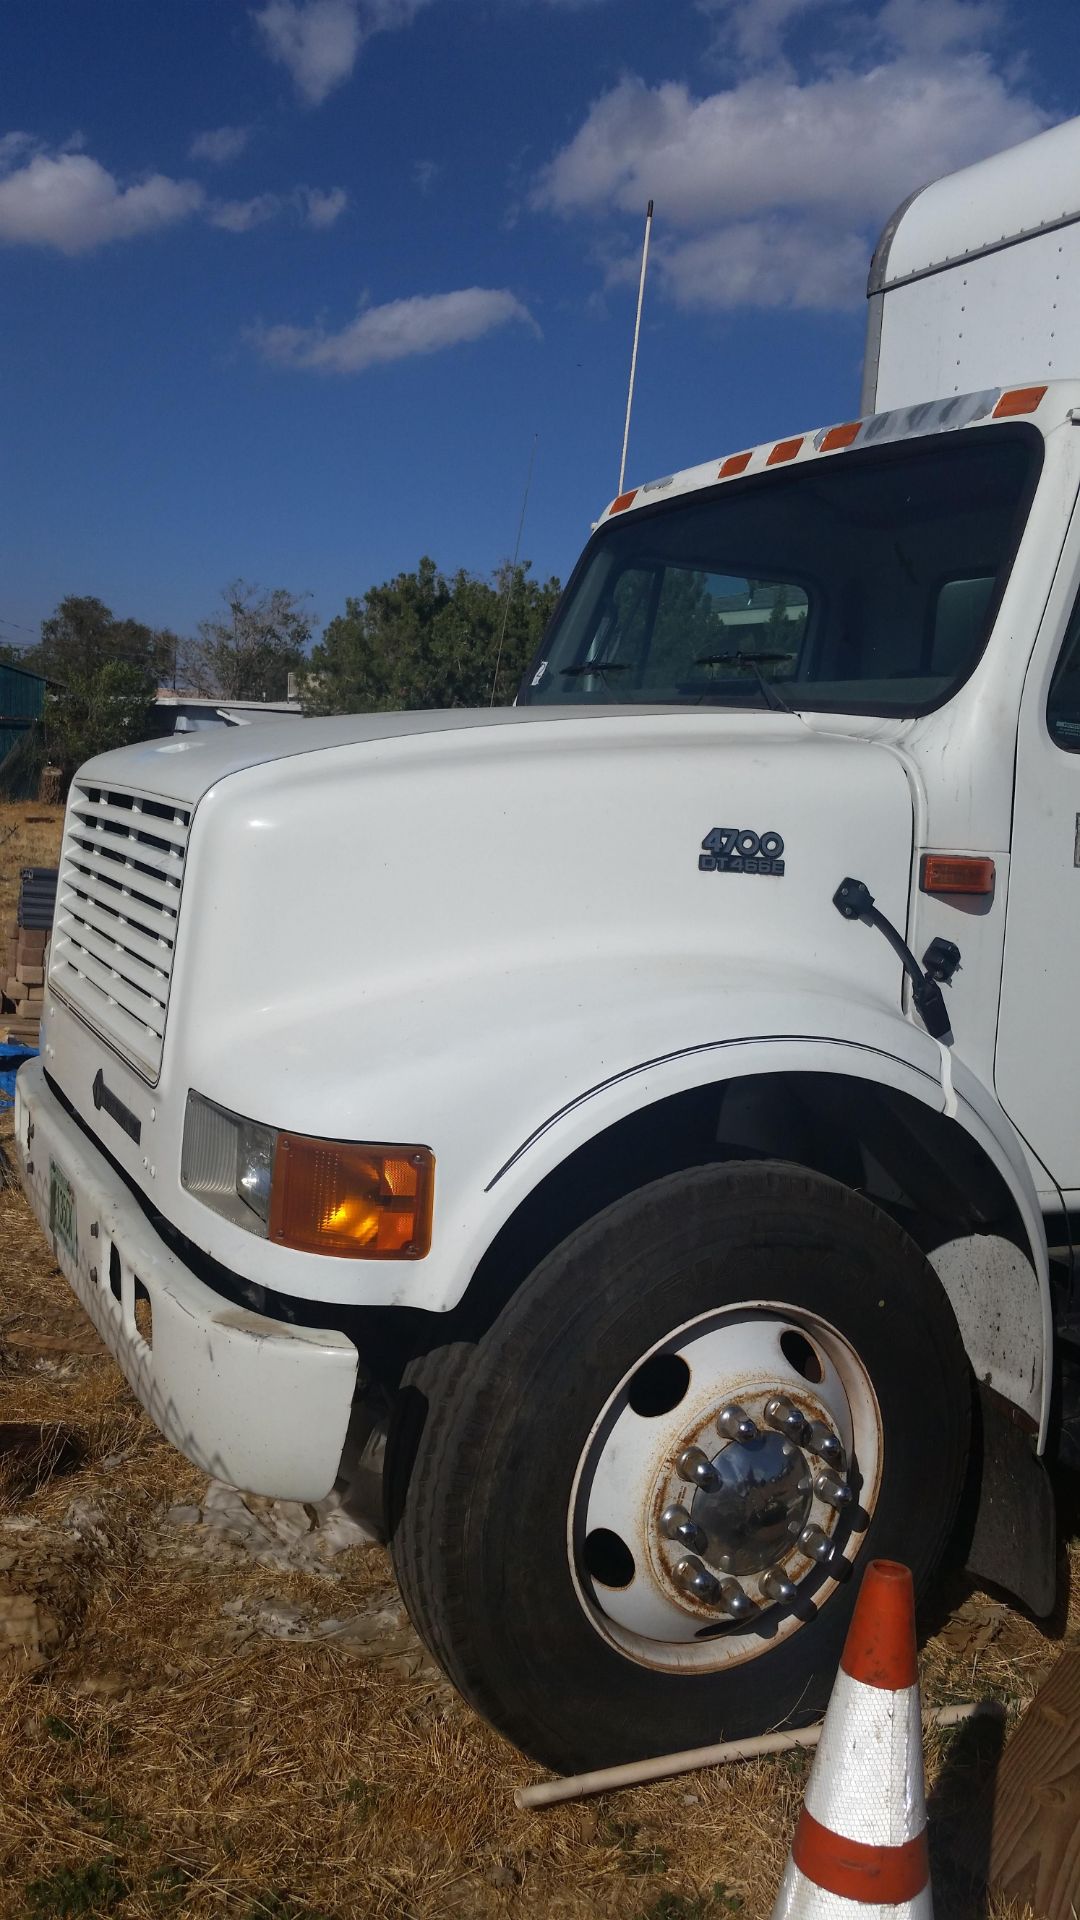 2001 INTERNATIONAL 24 FT. TRUCK w/ LIFT GATE (HAS CRACKED WATER PUMP CASING) - Image 2 of 2